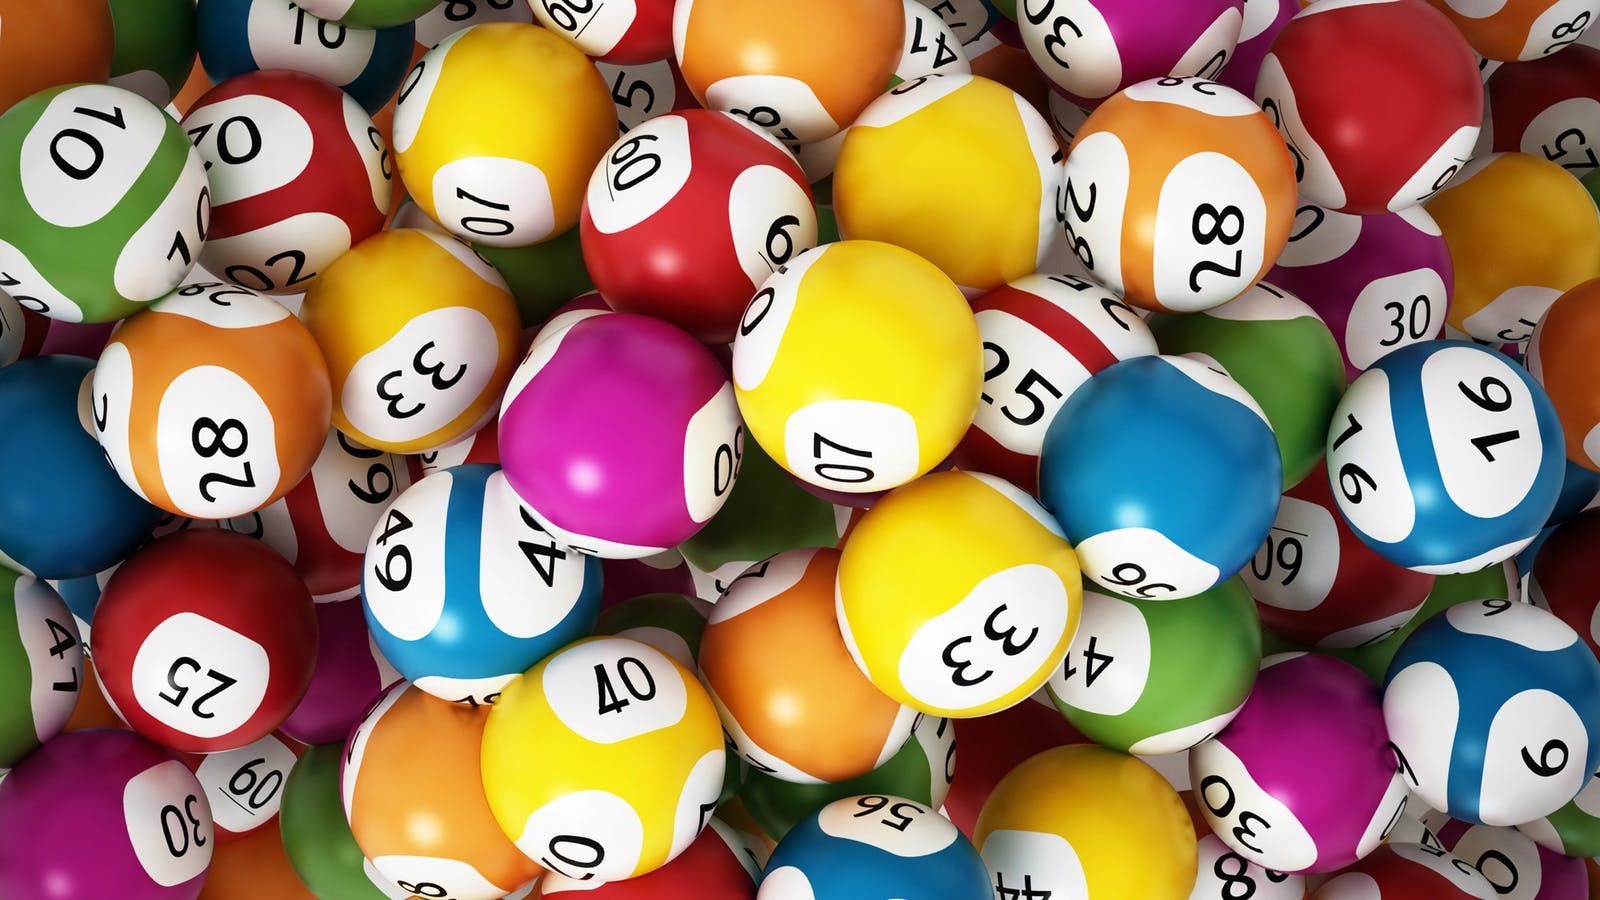 Online Lottery: What And Why Are They So Famous Among Loto Lovers